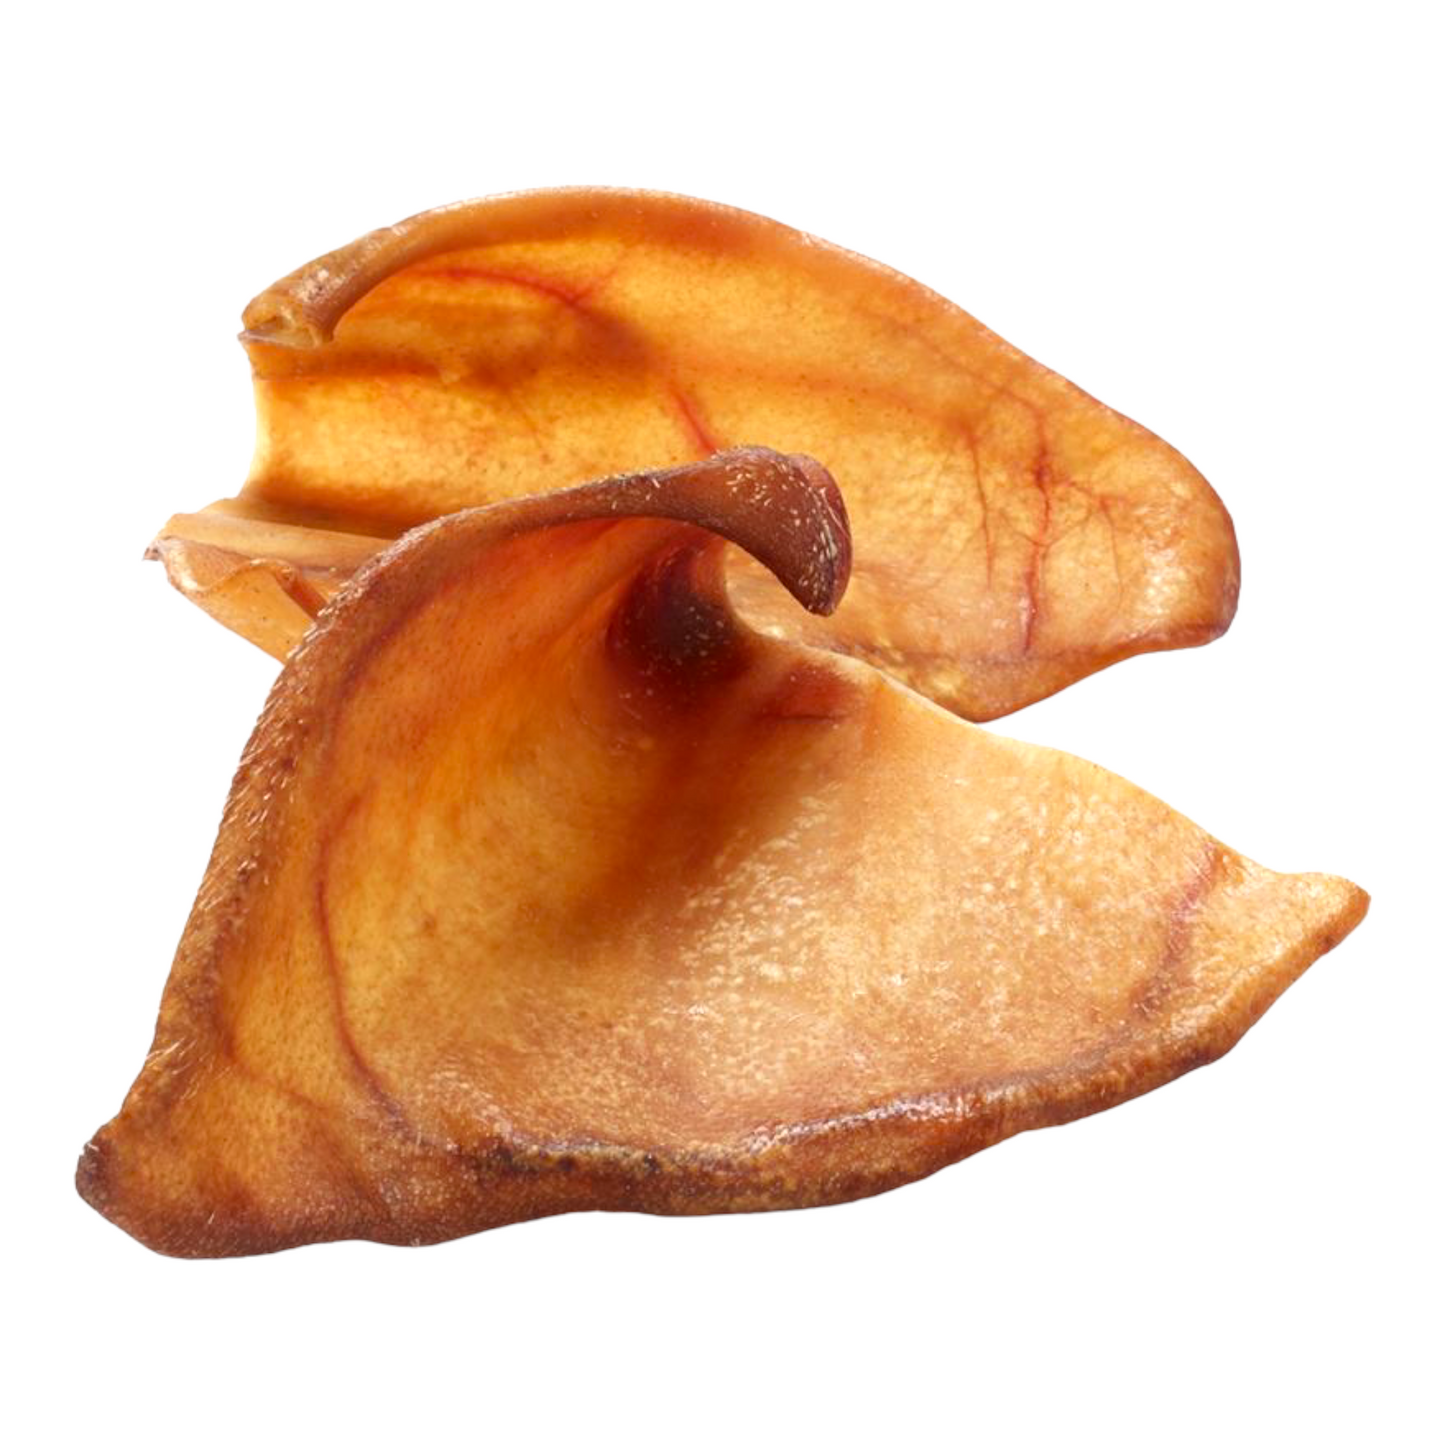 Natural Treats Pigs Ears, 3 pack